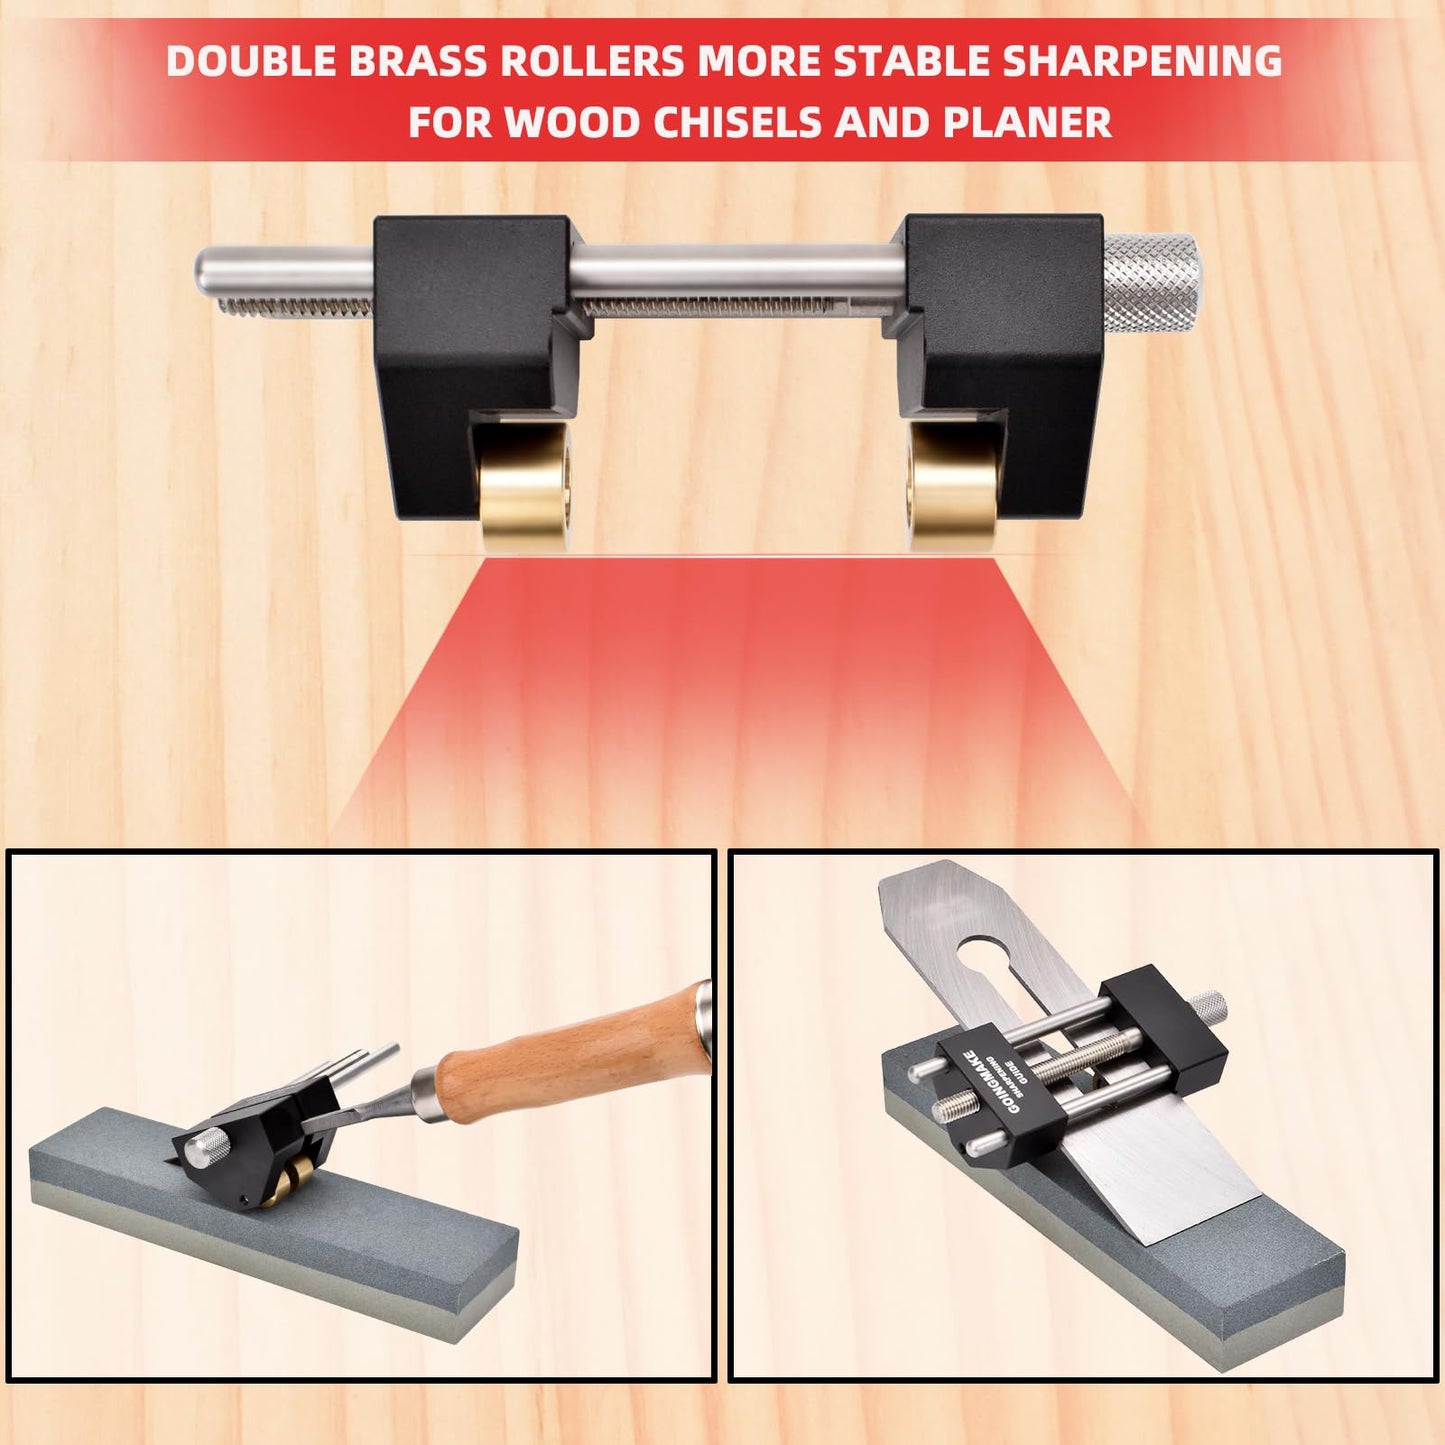 GOINGMAKE Honing Guide System Chisel Sharpening Kit for Woodworking Chisels and Planes 5/32" to 3" Chisel Sharpener Sharpening Holder Guide